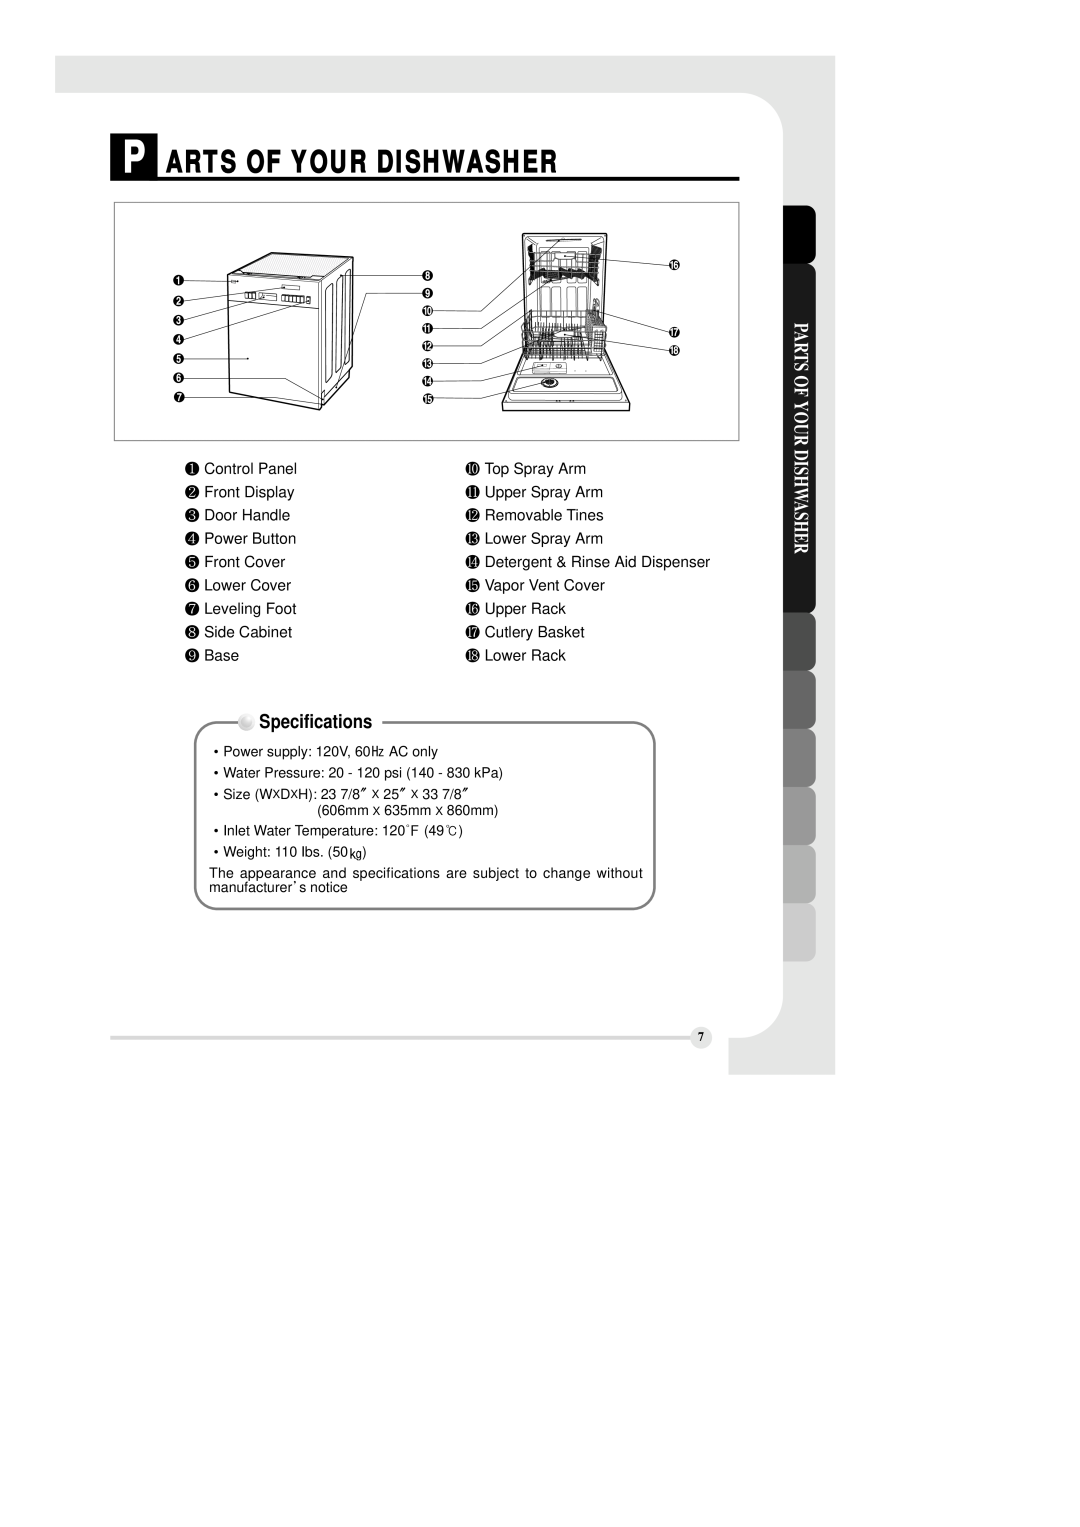 LG Electronics LDS 5811BB, LDS 5811ST, LDS 5811WW manual P Arts Of Your Dishwasher, Specifications, Parts Of Your Dishwasher 